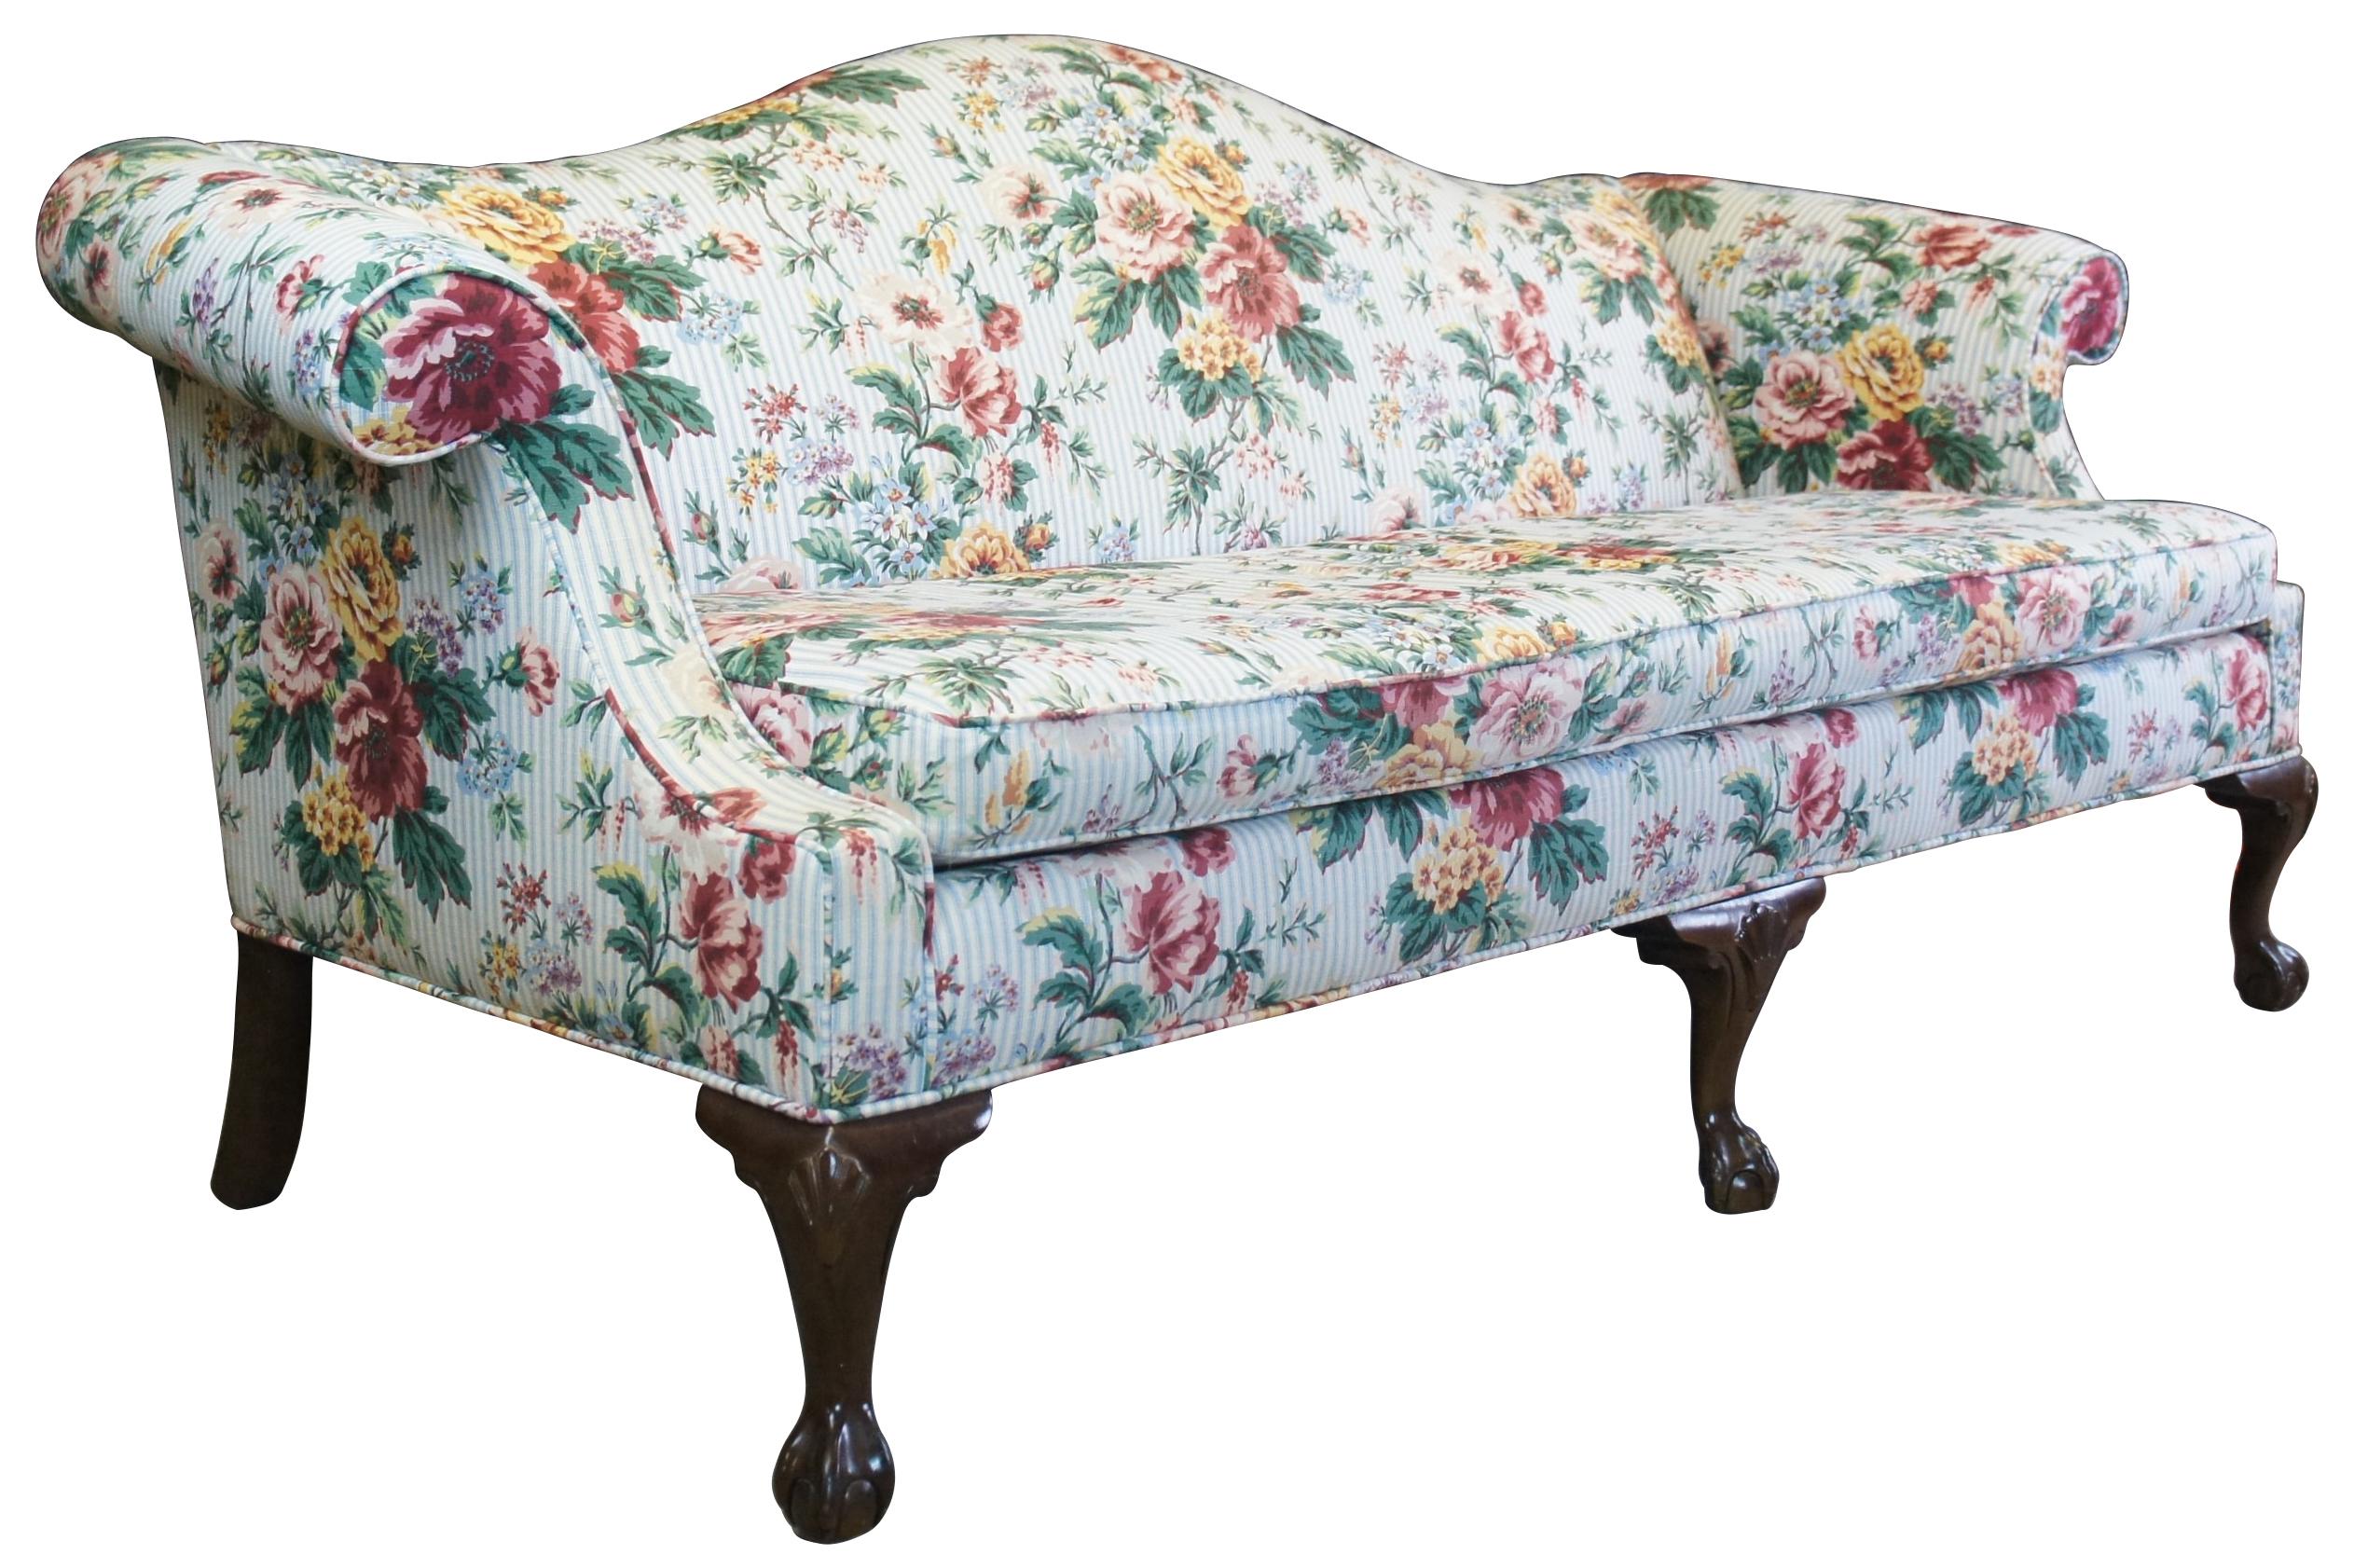 Ethan Allen Georgian Court Queen Anne or chippendale style camelback sofa Mp. 20-7179, circa 1970s. Made from cherry with cabriole legs featuring a shell carved knee and ball and claw feet. The sofa is upholstered in a blue and white fabric with